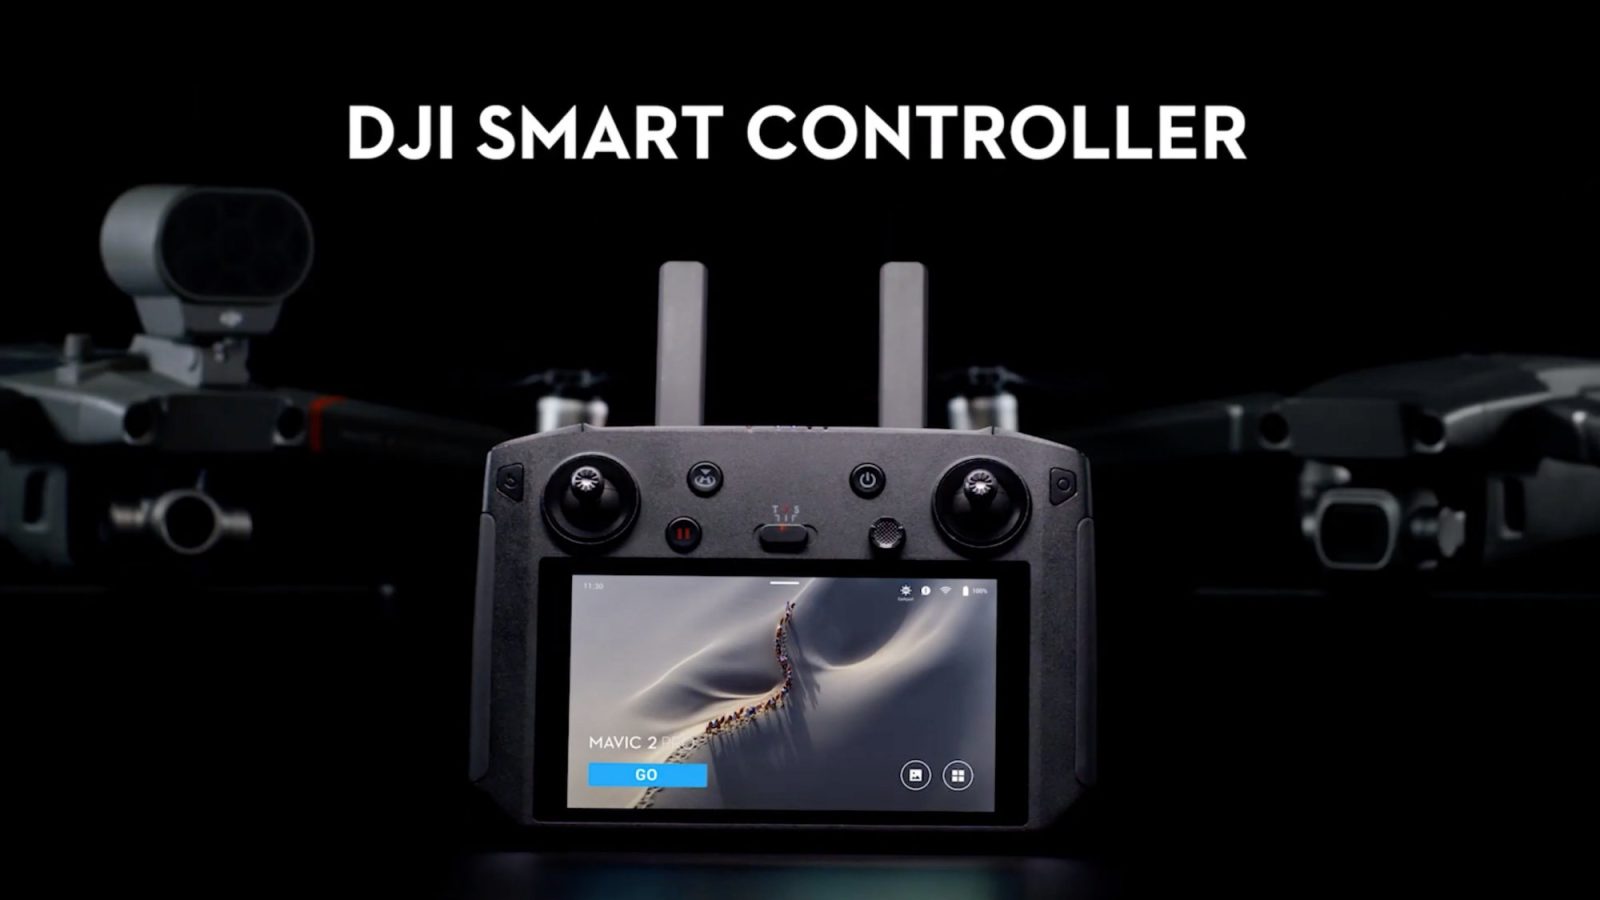 DJI Smart Controller for the Mavic 2 Zoom, Pro and Enterprise to be launched at CES 2019?